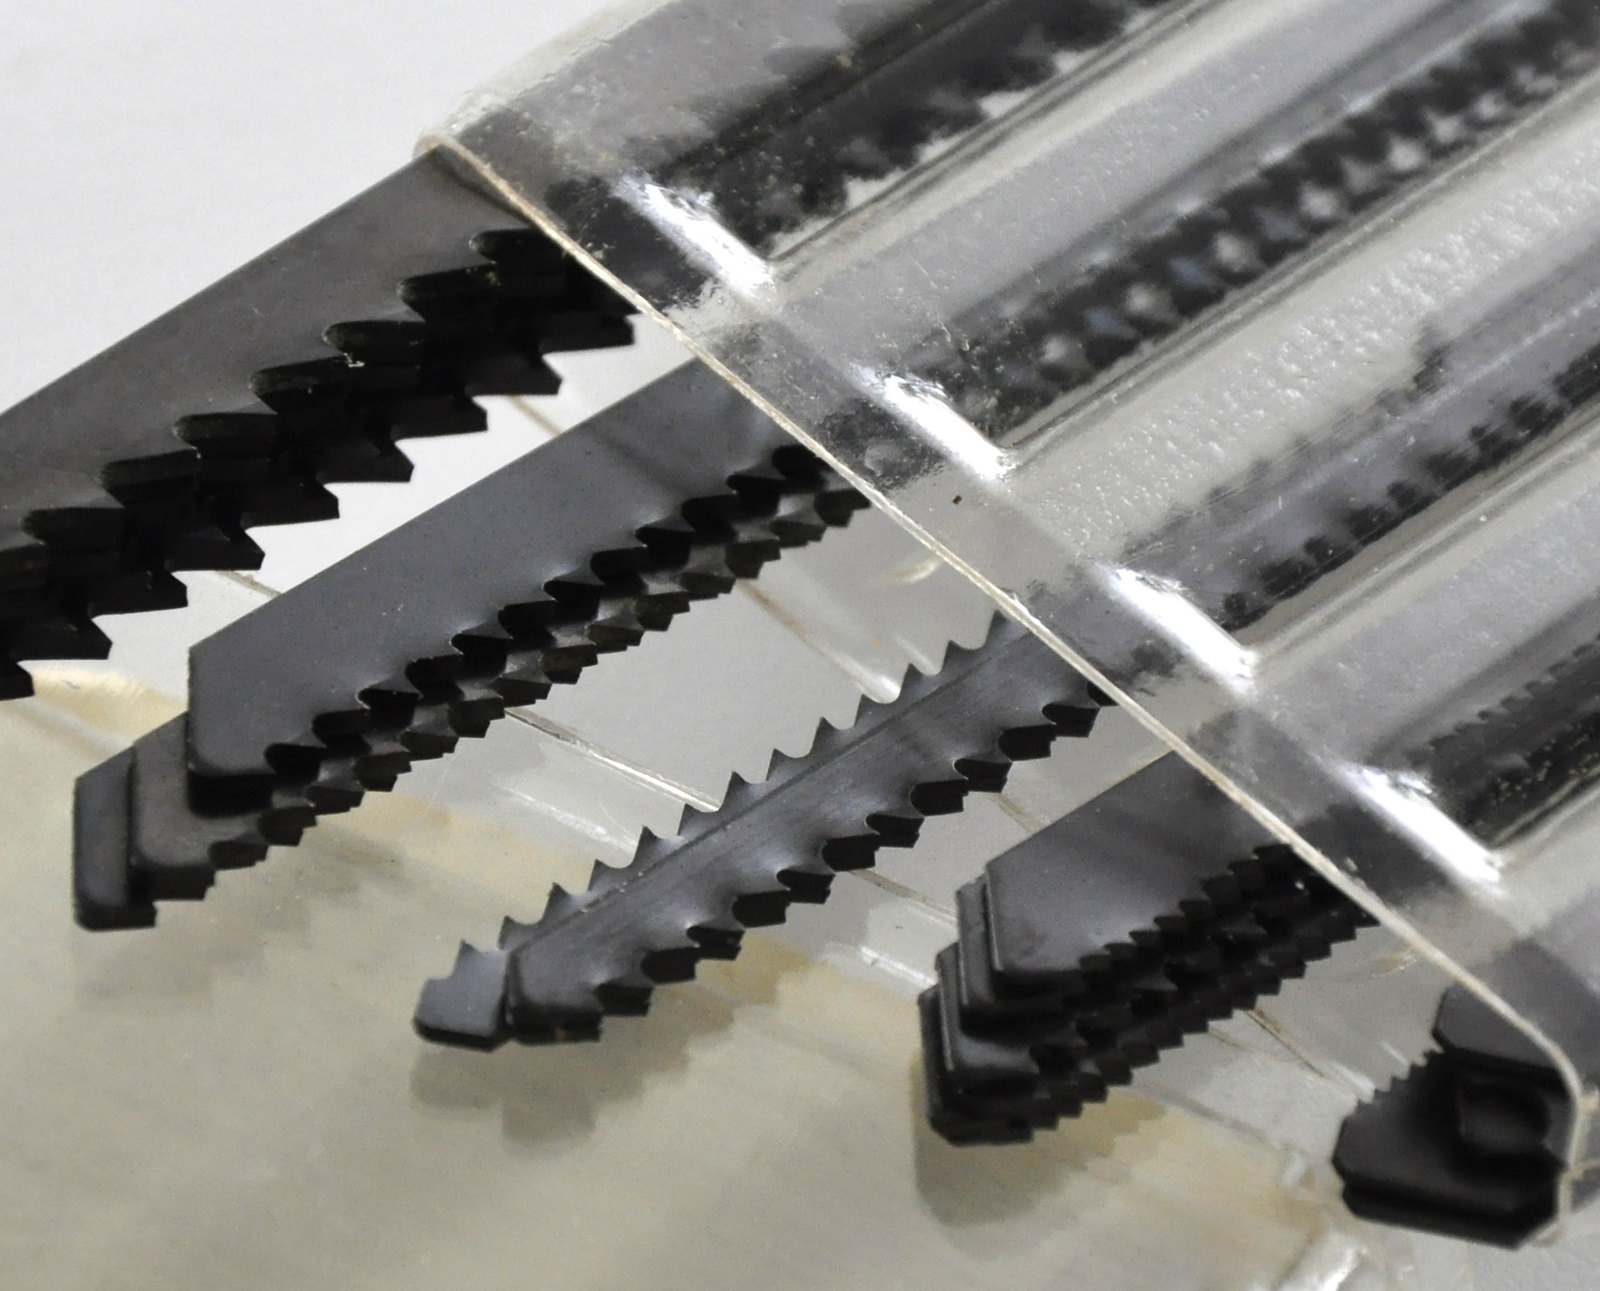 Best Jigsaw Blade Review & Buying Guide